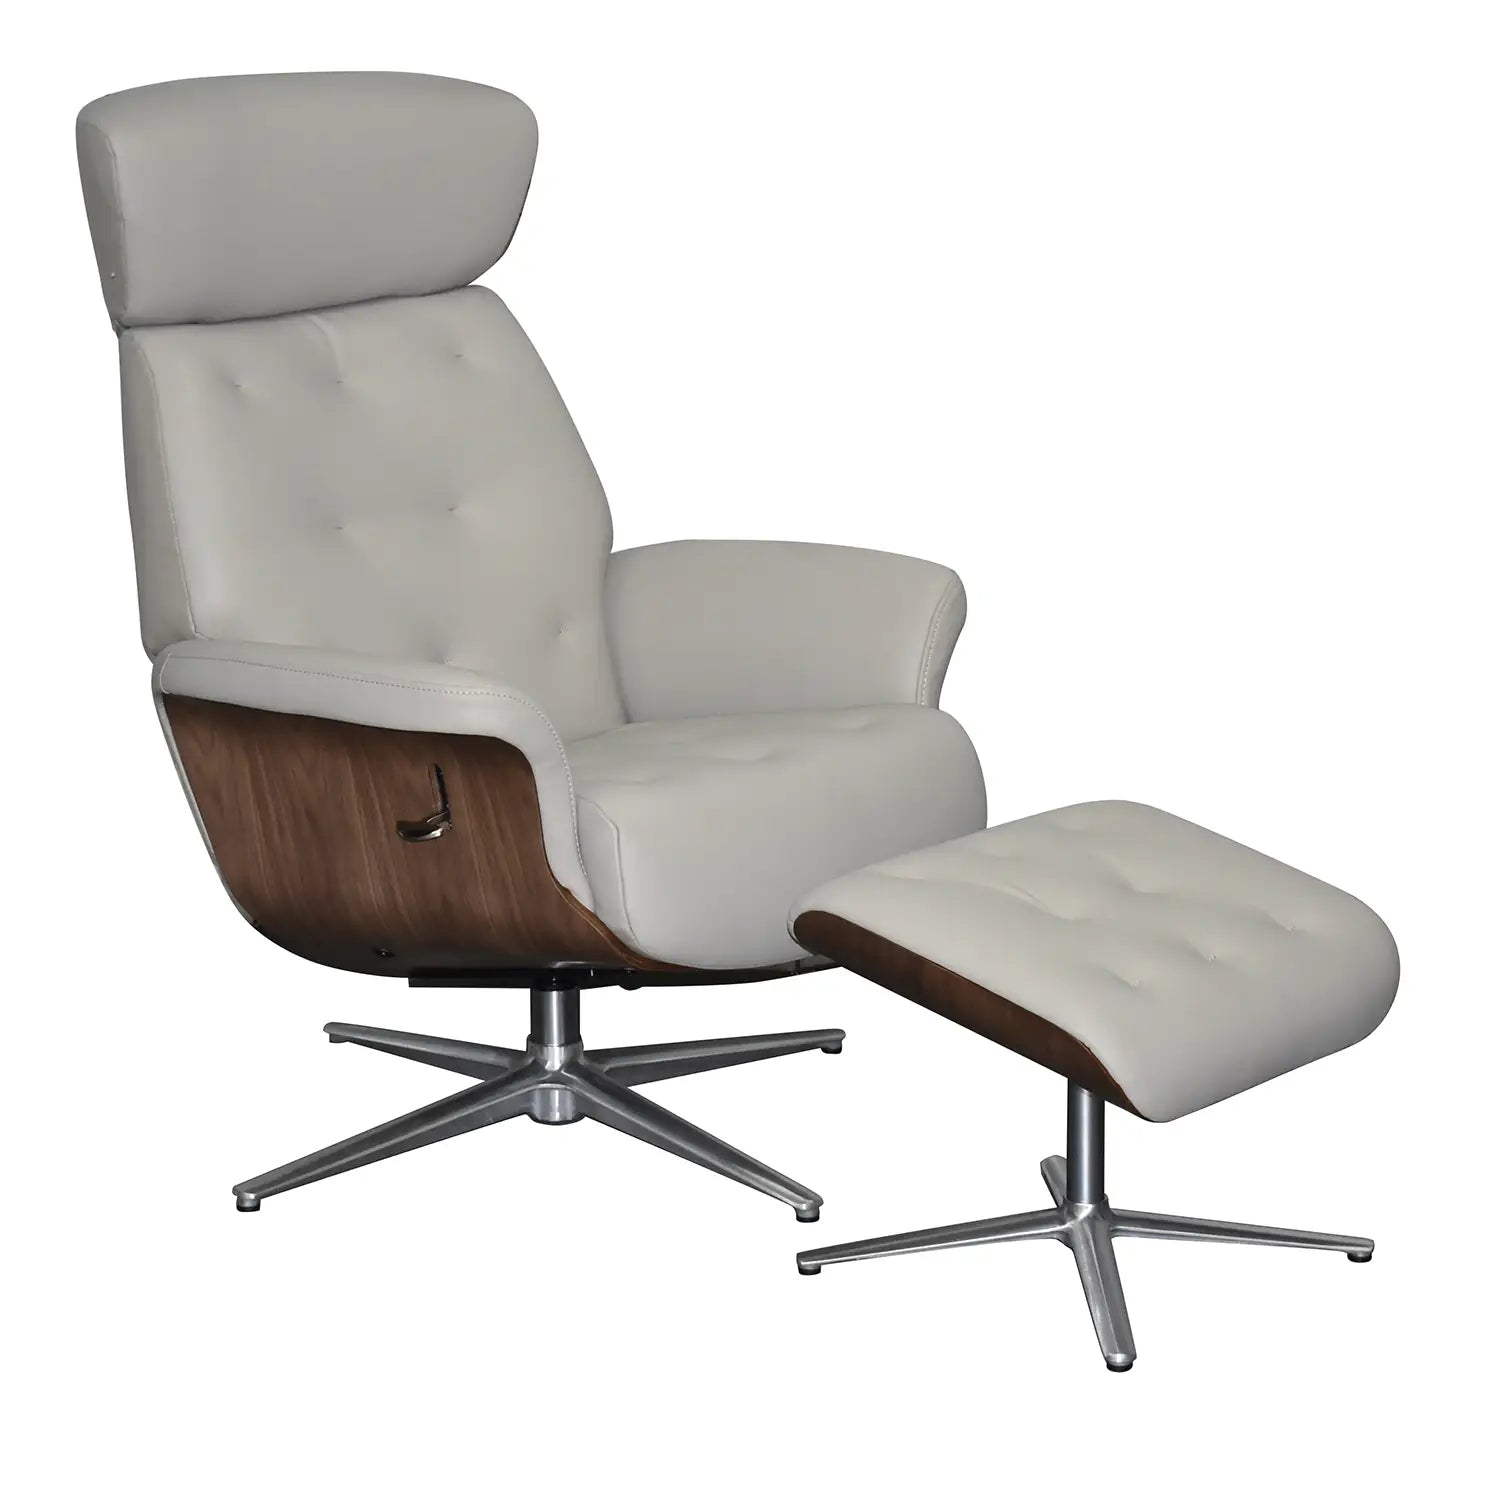 Kristof Leather Look Swivel Recliner Chair and Footstool